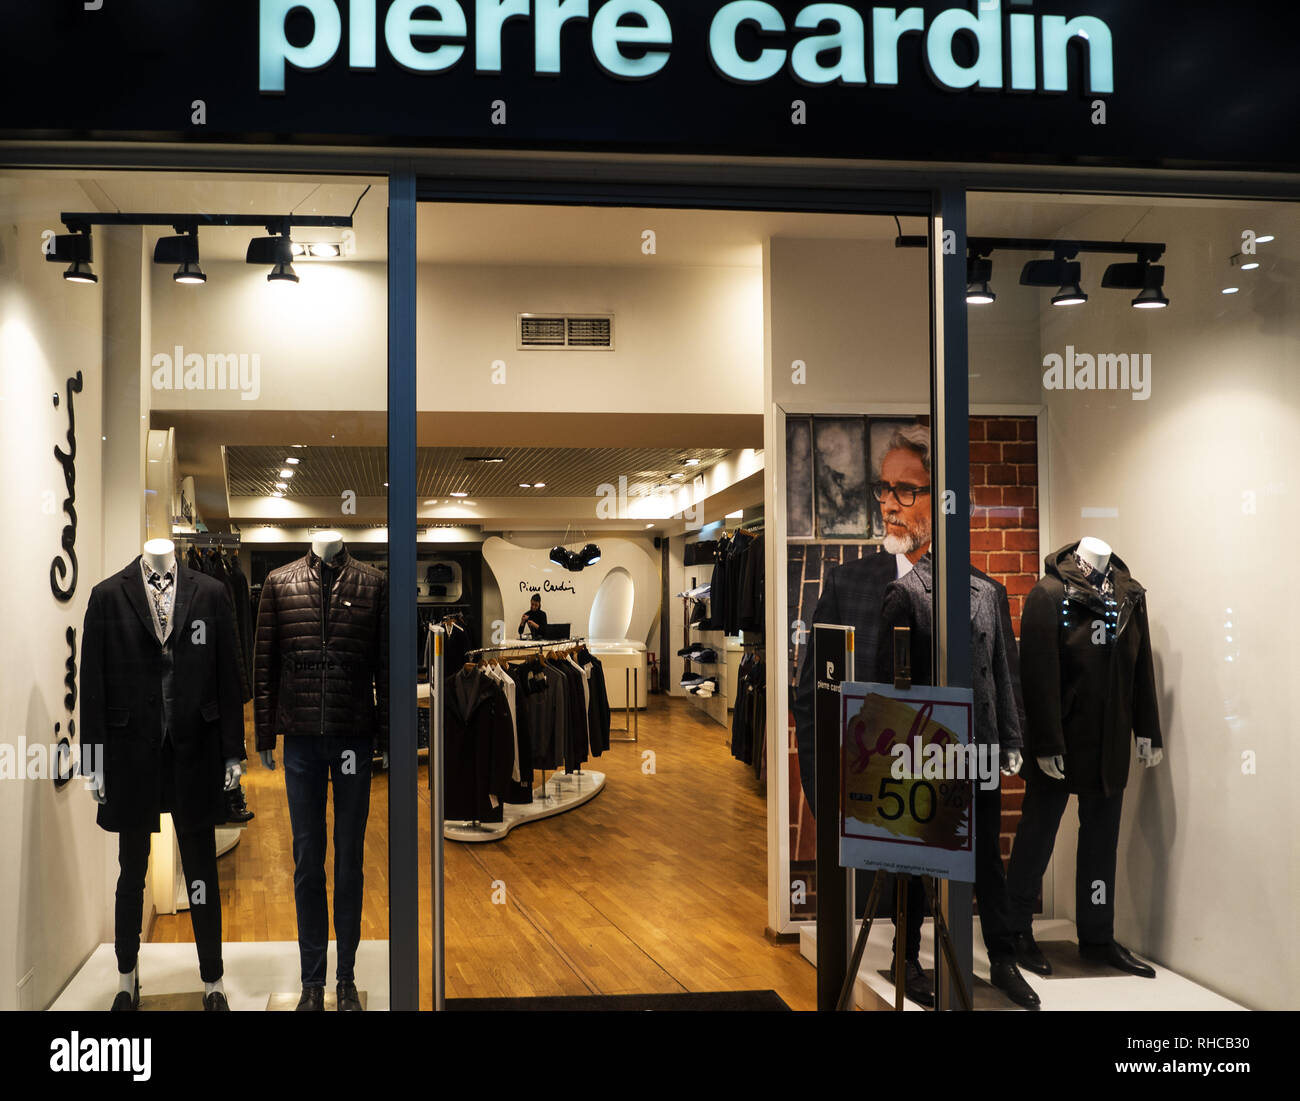 Pierre cardin store hi-res stock photography and images - Alamy